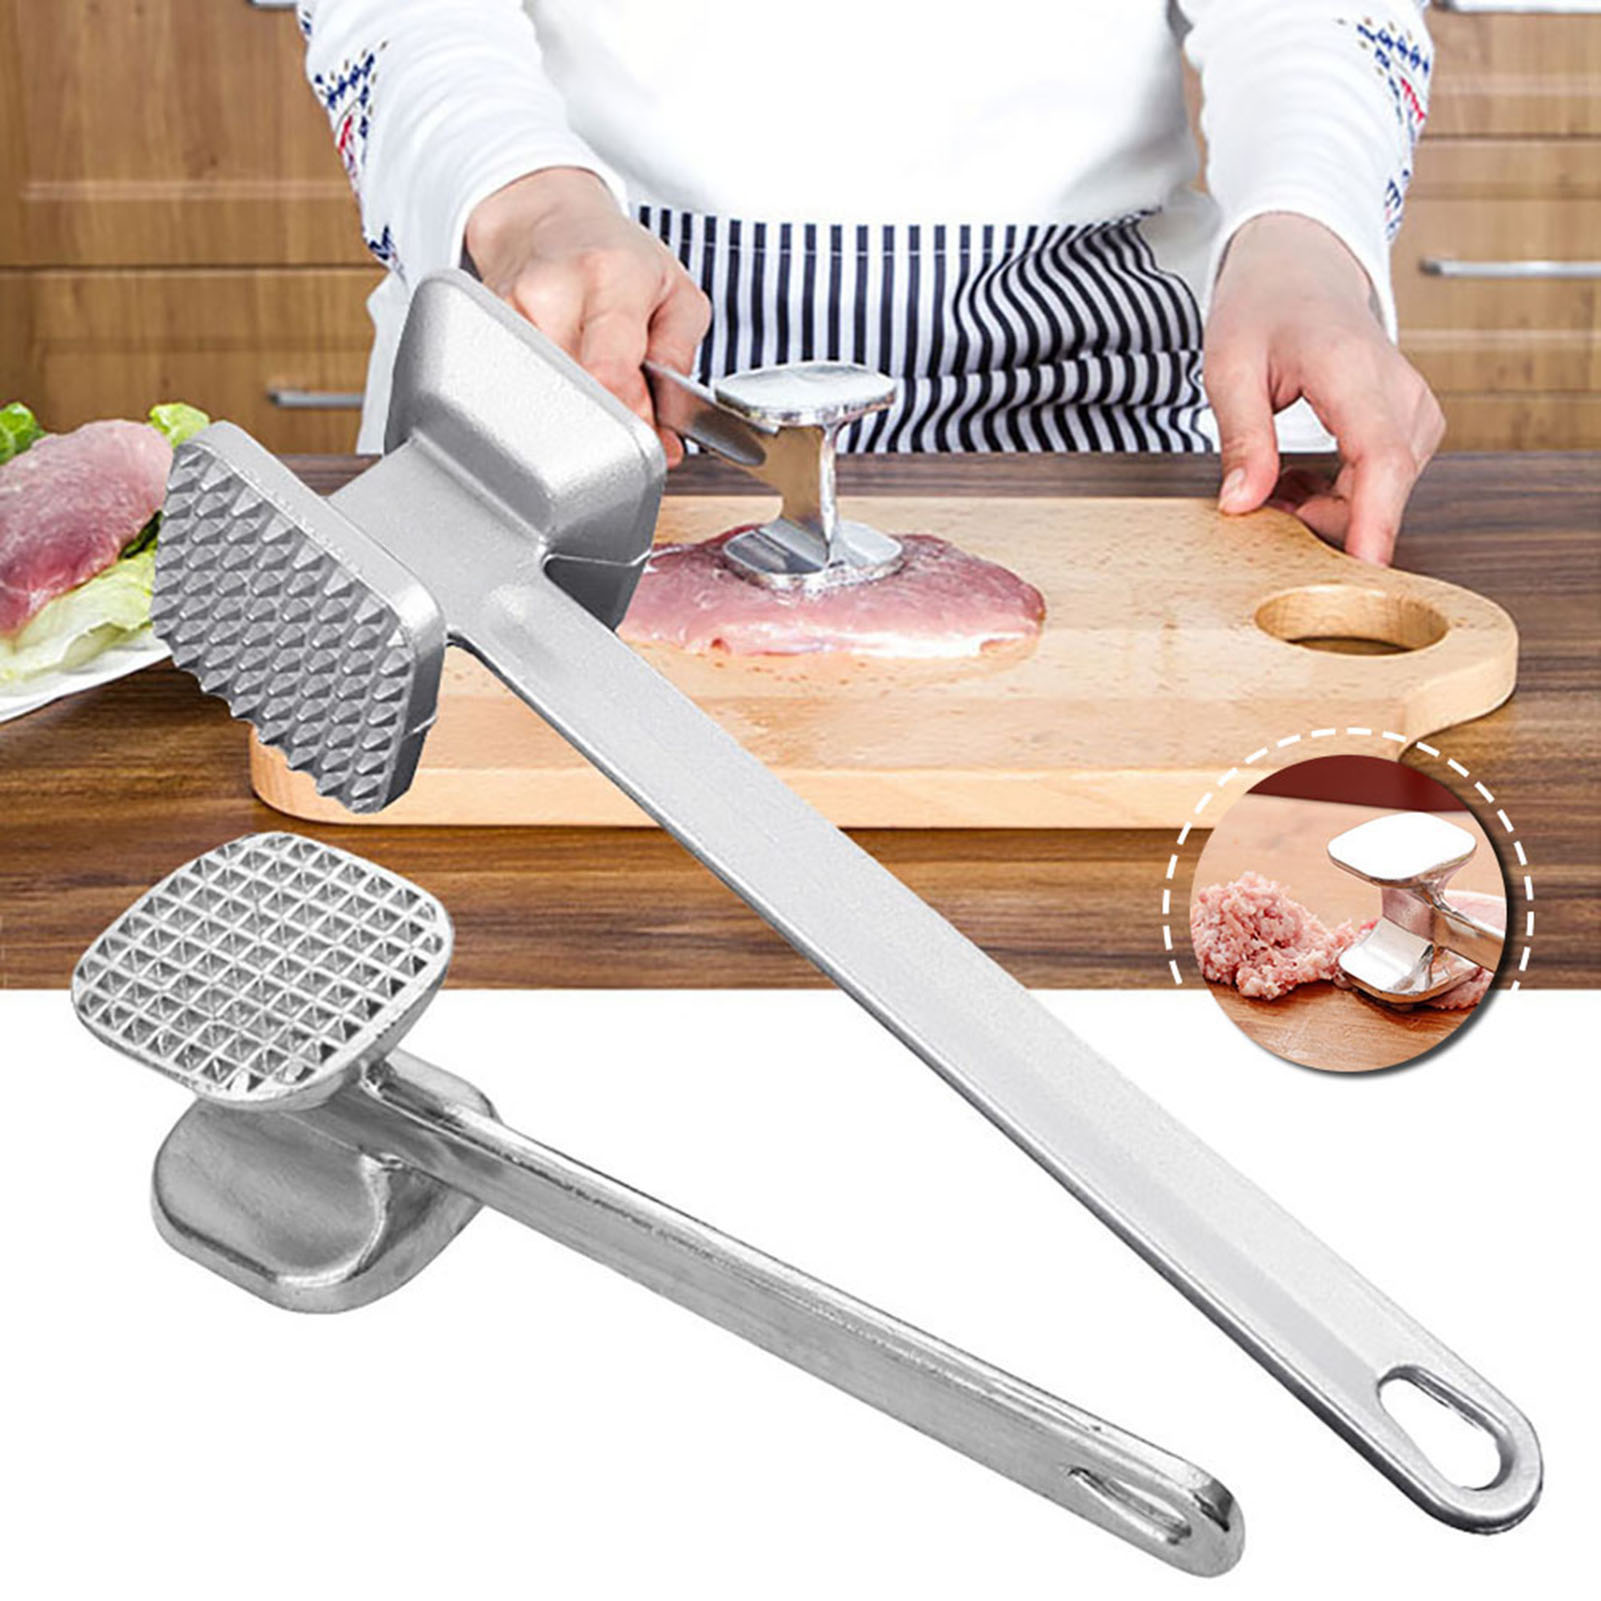 Alloy Steak Meat Hammer, Heavy Duty Hammer Mallet Tool & Chicken Pounder, Dual-Sided, Meat Mallet, Meat Hammer, size L - image 1 of 7